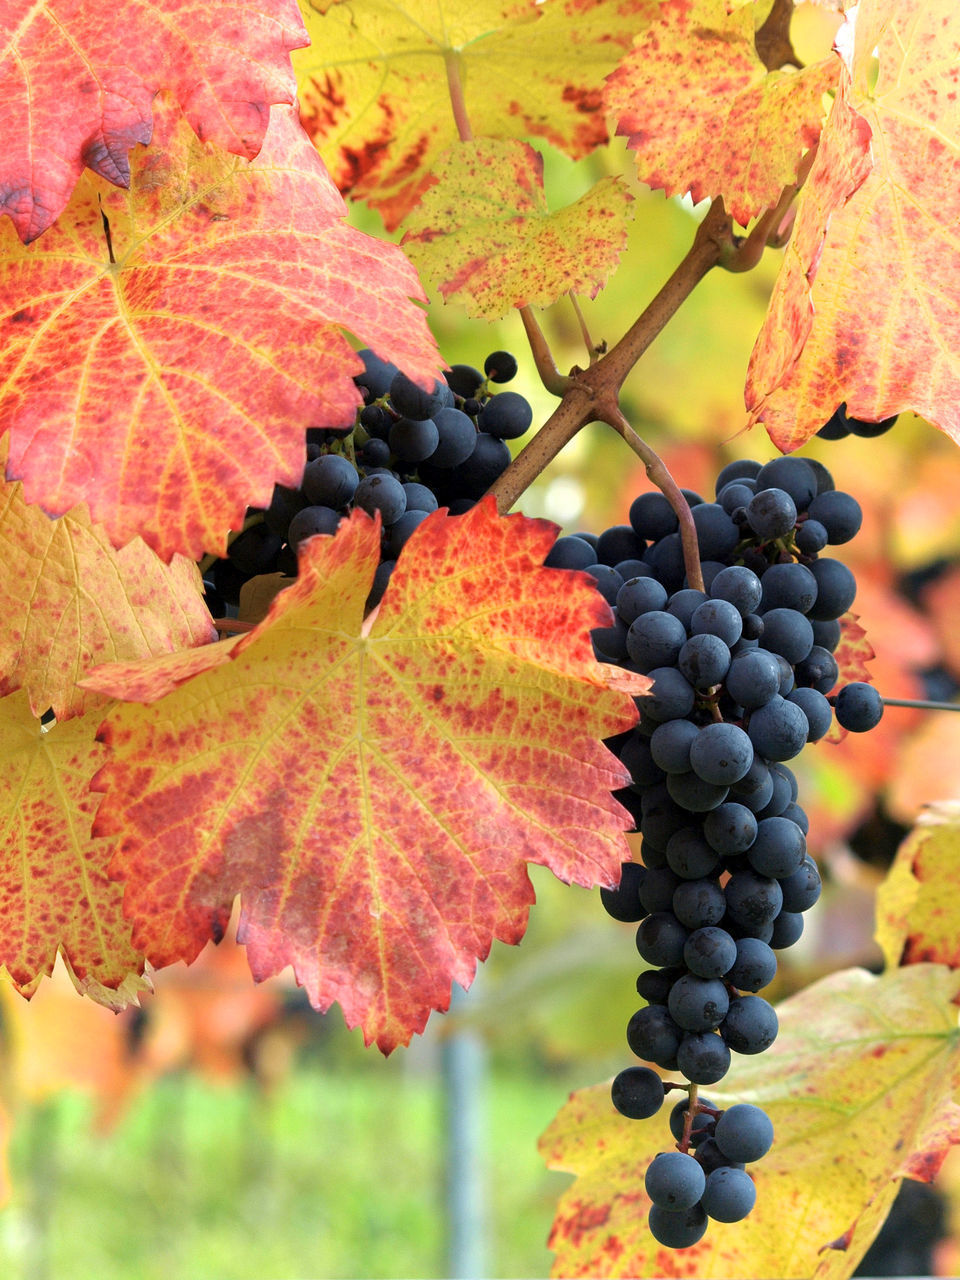 CLOSE-UP OF GRAPES GROWING IN VINEYARD